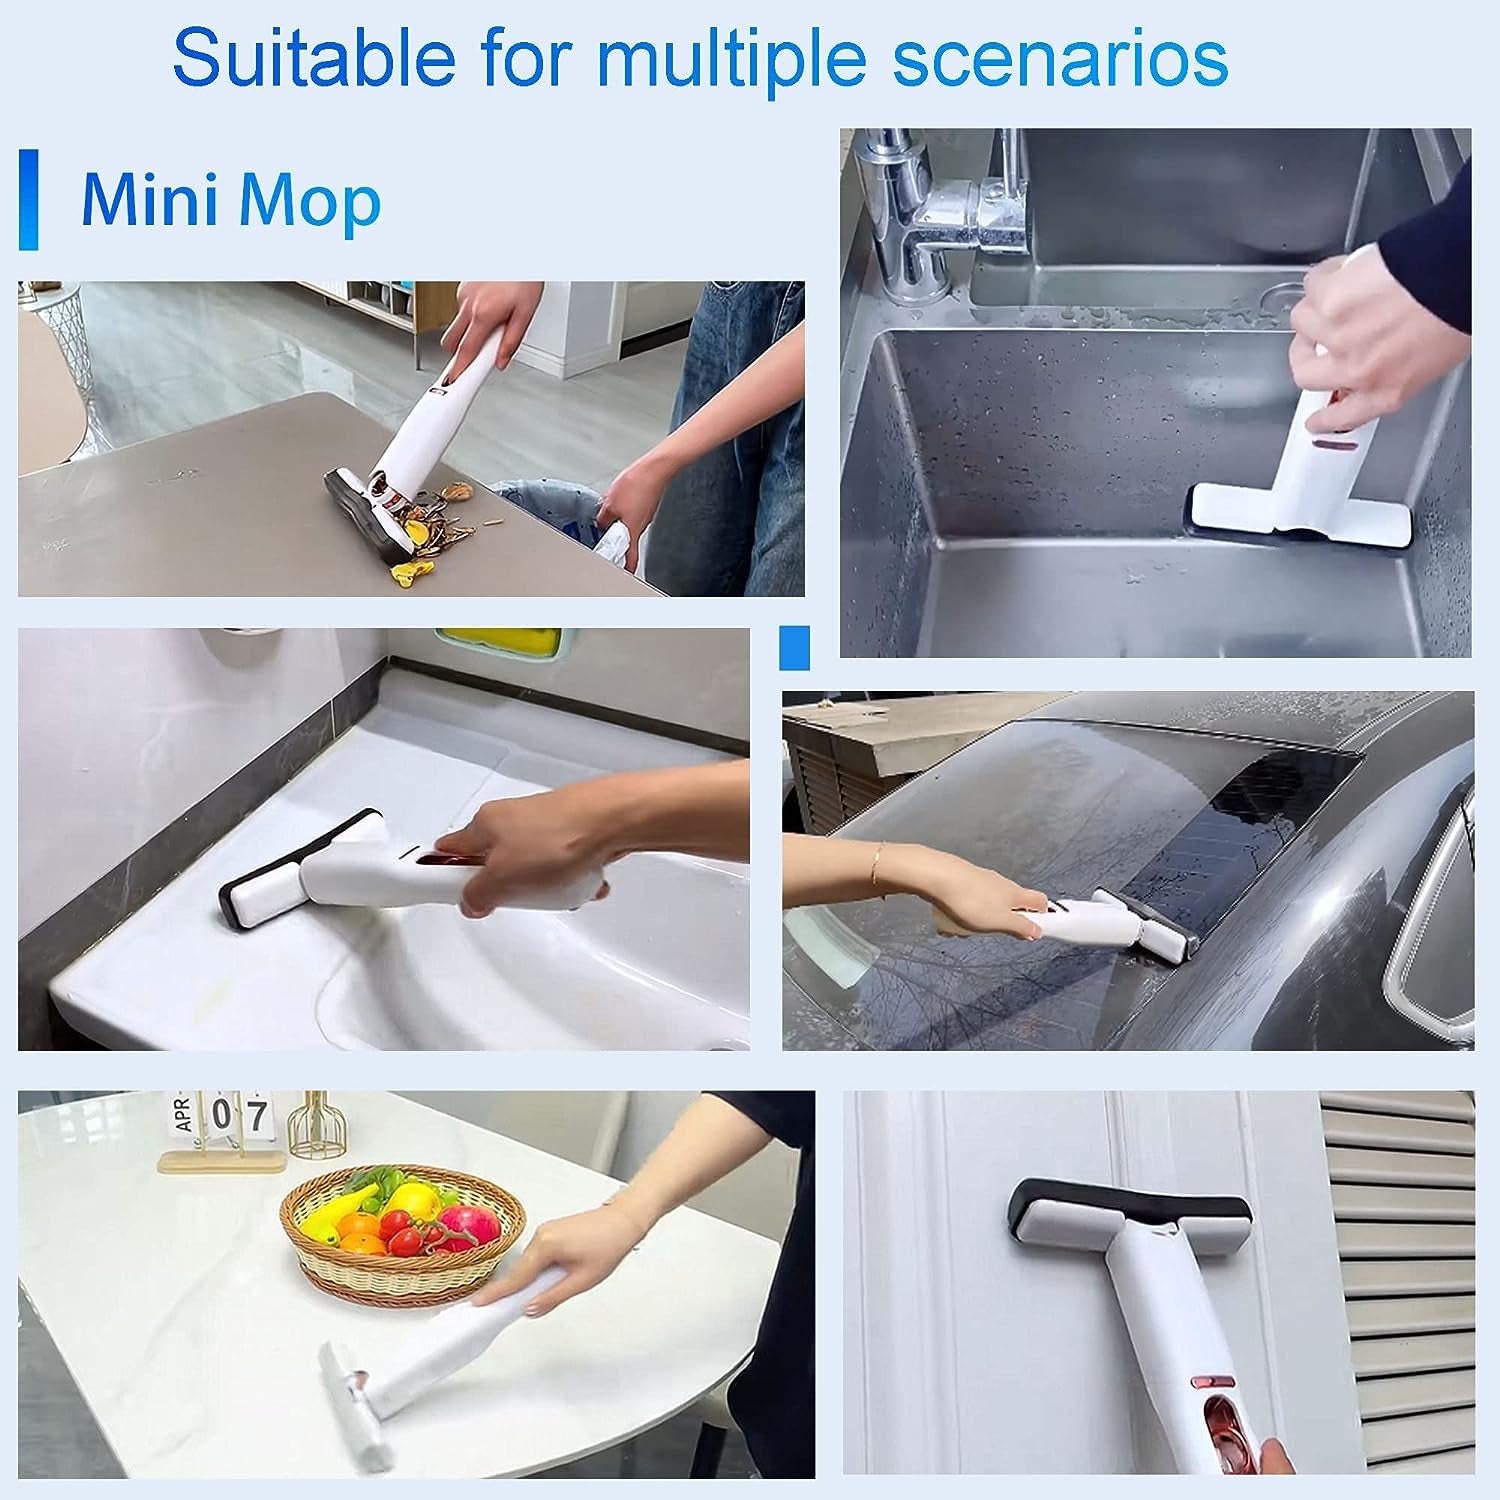  Mini Mop Portable Self Squeeze Automatic Cleaning Mop. Suitable for Wash Basin Sink Bathroom Car Glass Kitchen